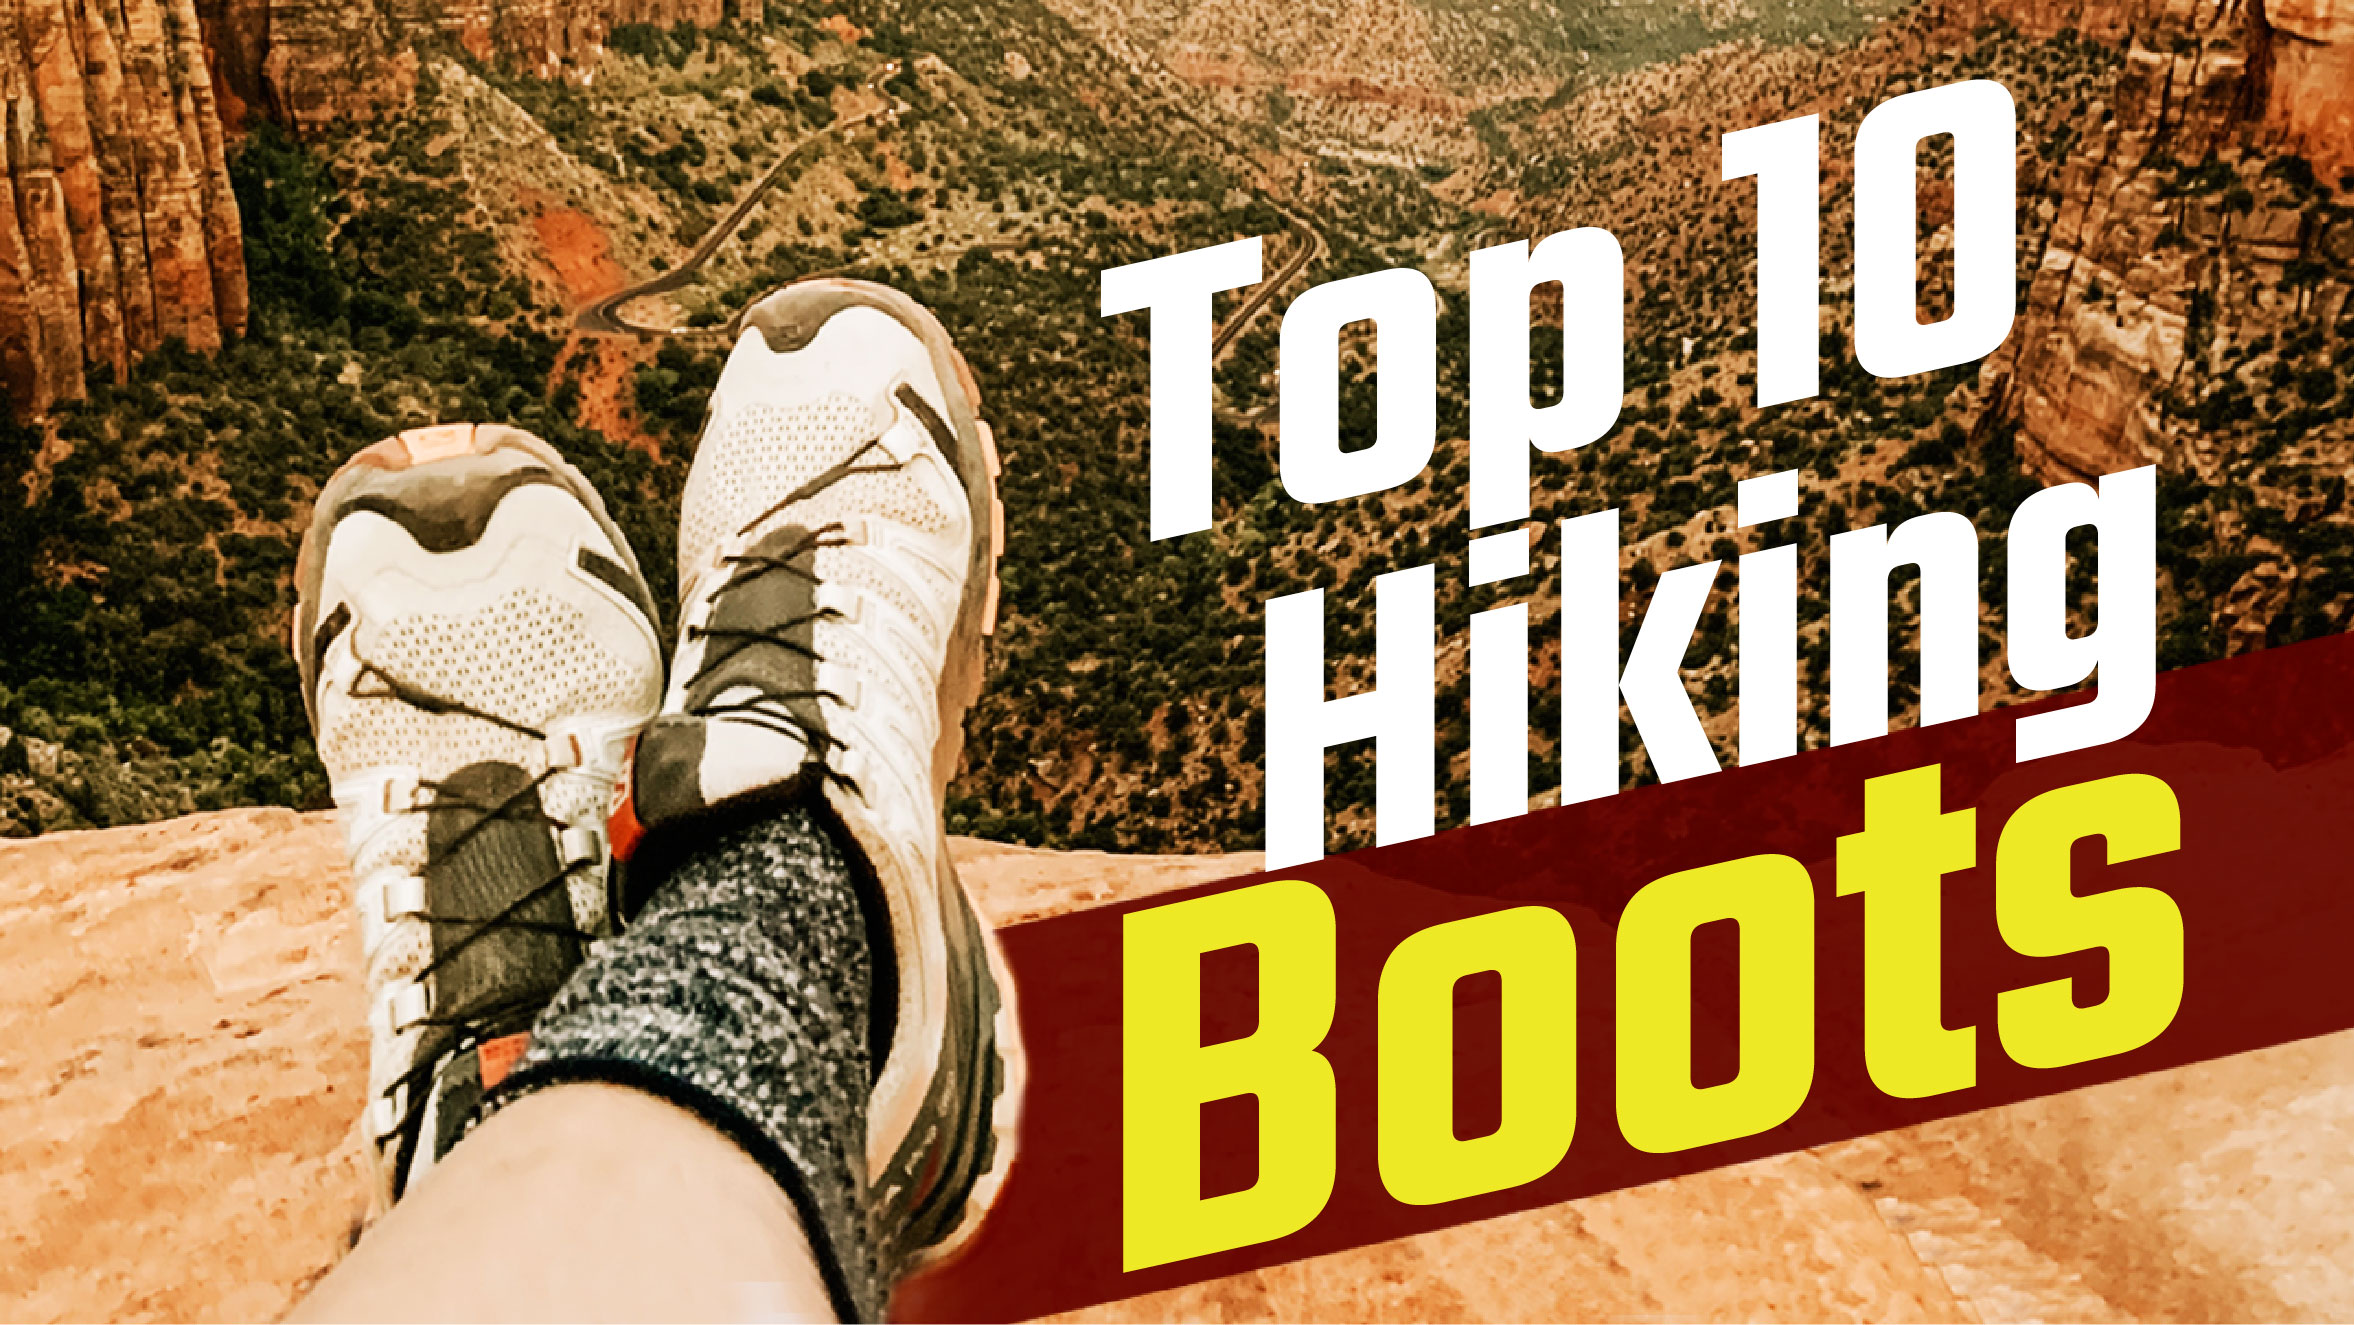 You are currently viewing Hiking Boots to Take Your Hiking in the Next Level